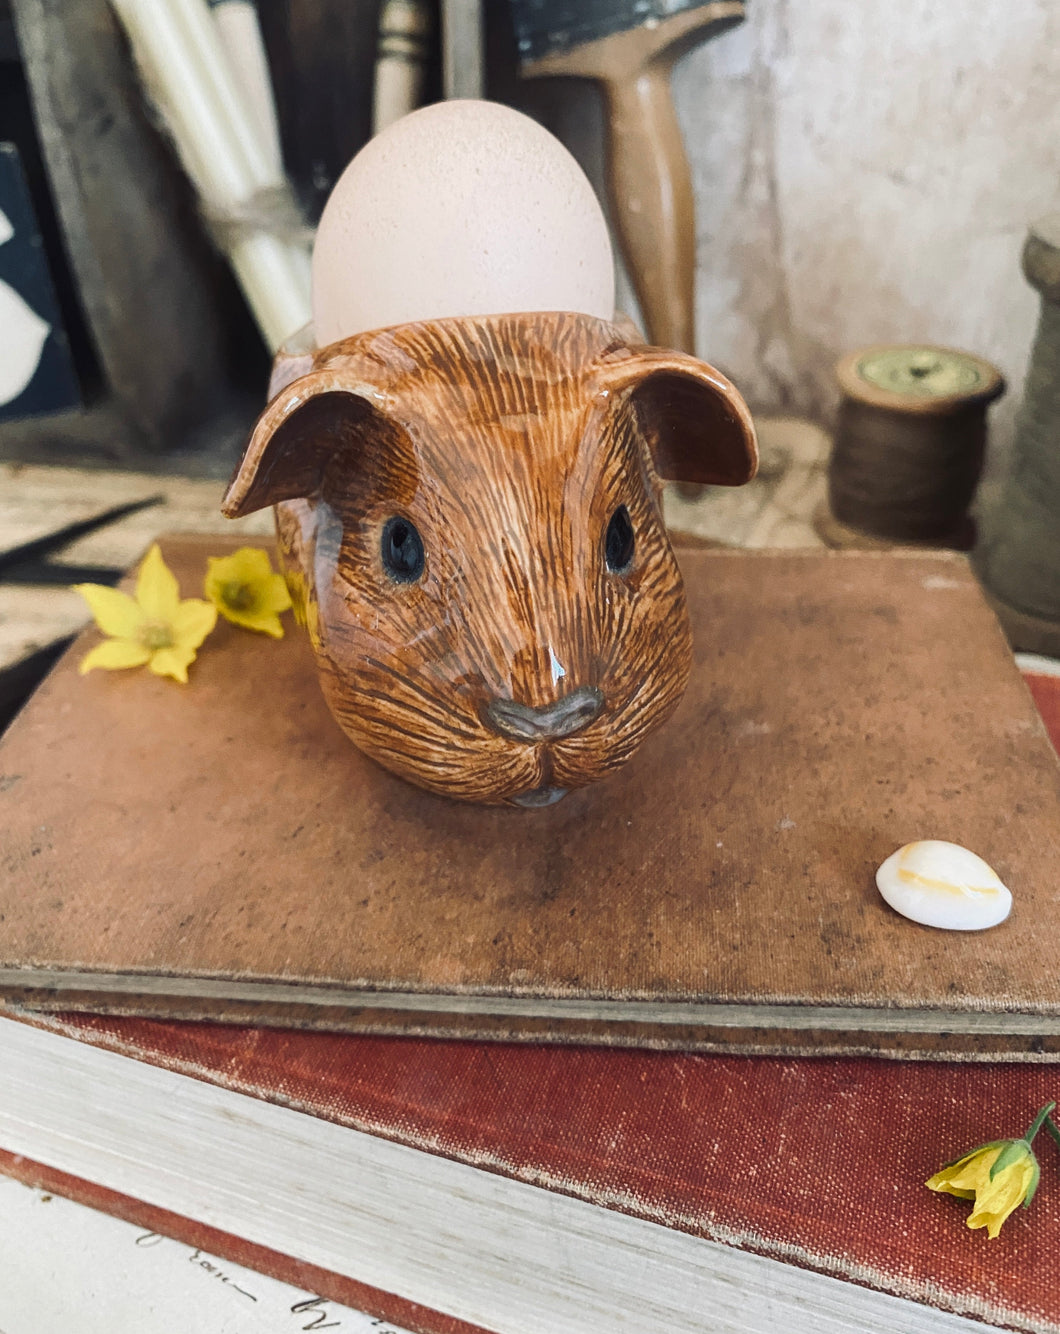 Pair of Guinea Pig Egg Cups